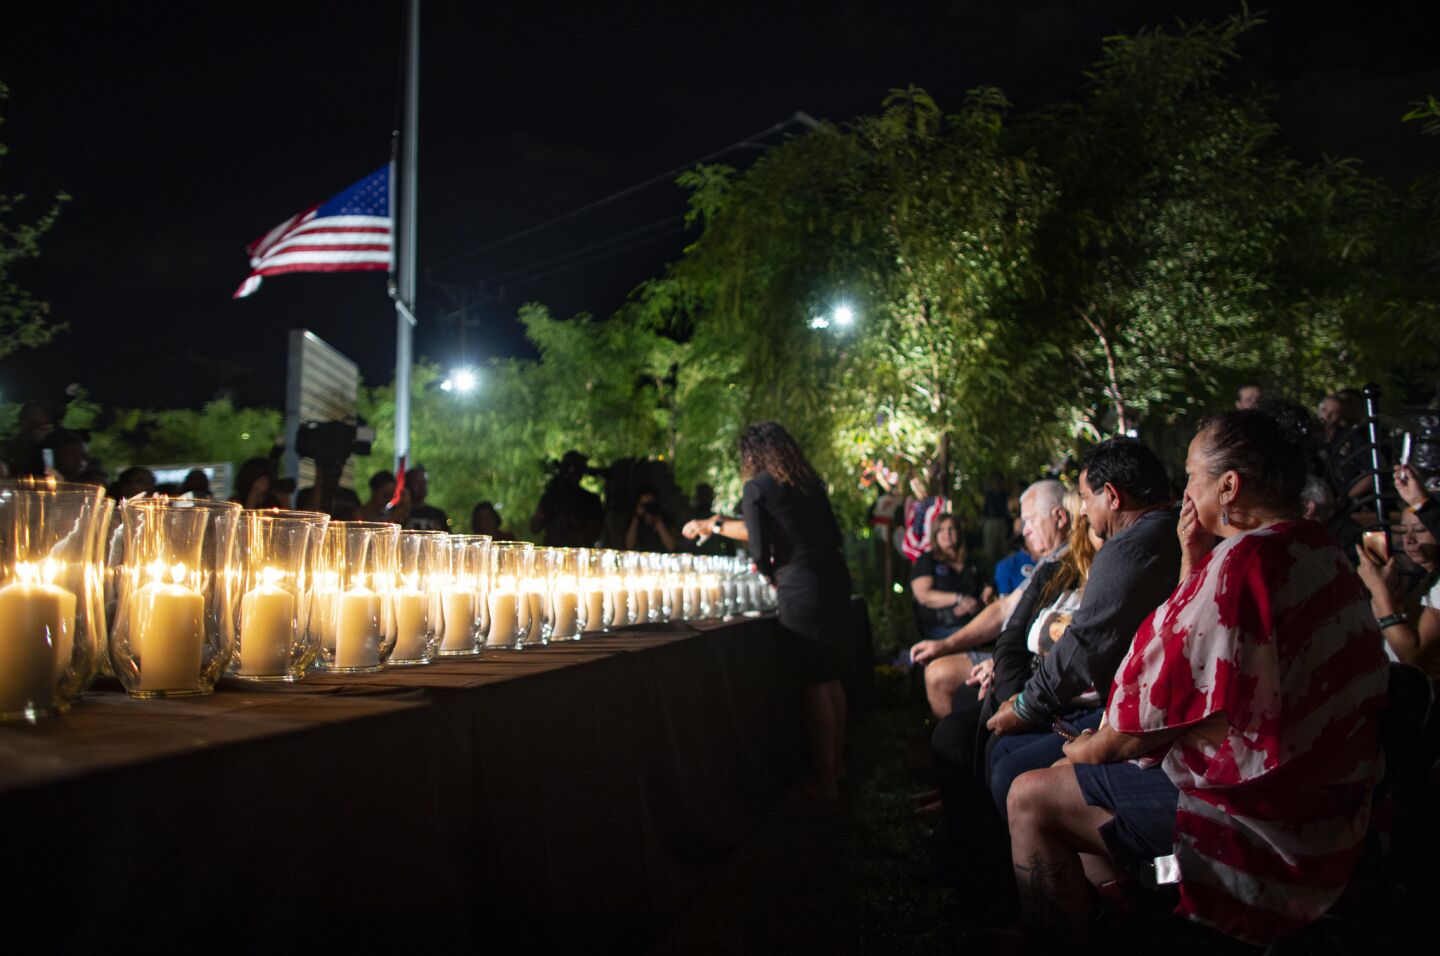 Family members grieve as the 58 victims' names are read aloud and candles are lit Oct. 1 on the one-year anniversary of the mass shooting in Las Vegas, Nevada.